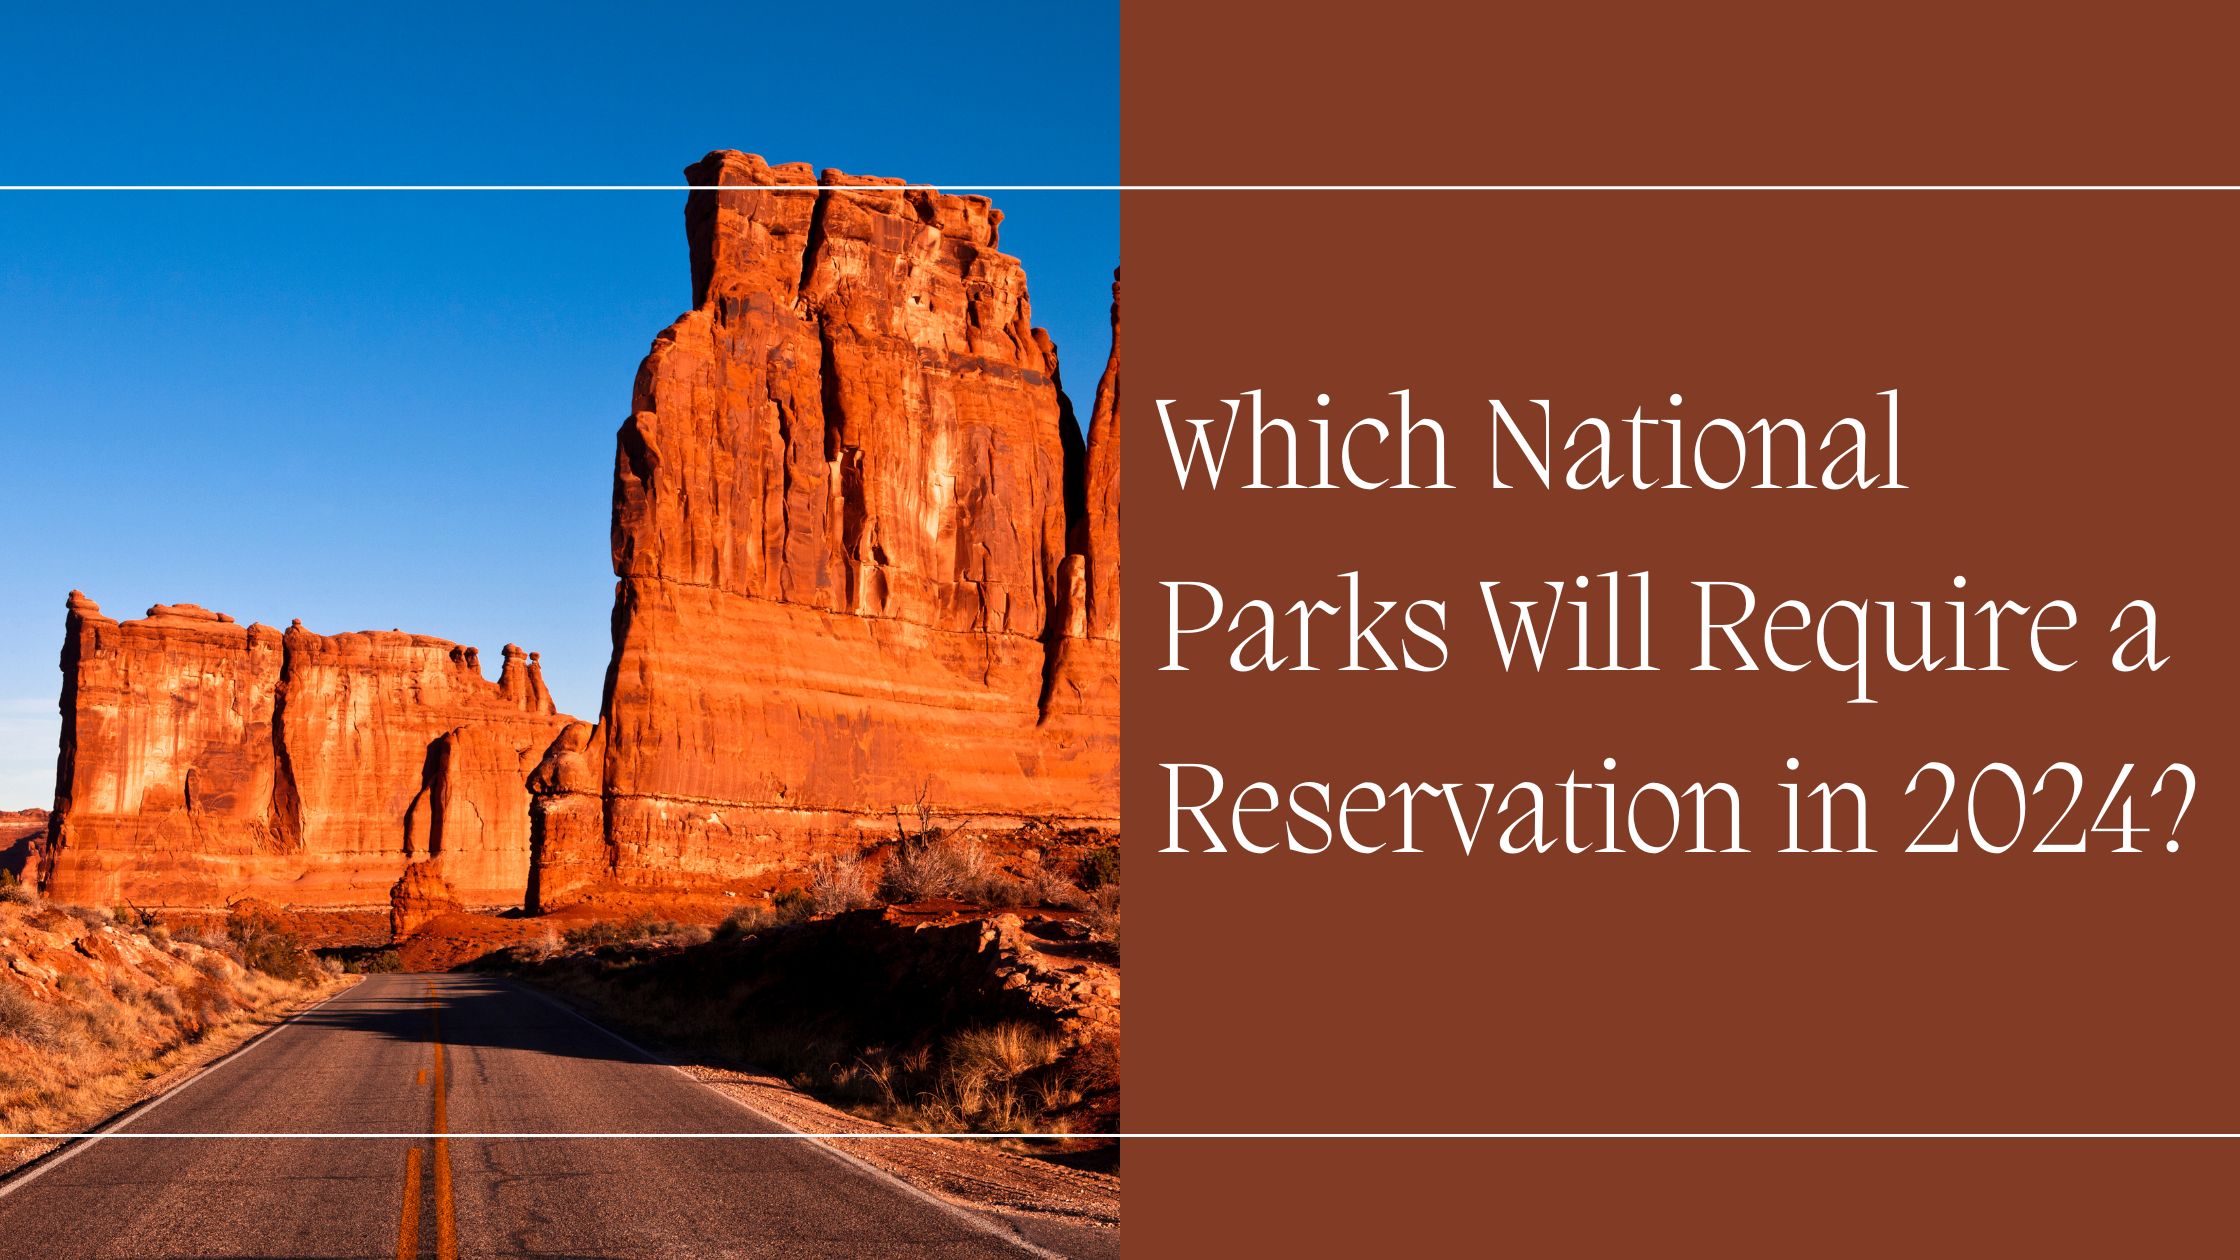 which national parks will require a reservation in 2024